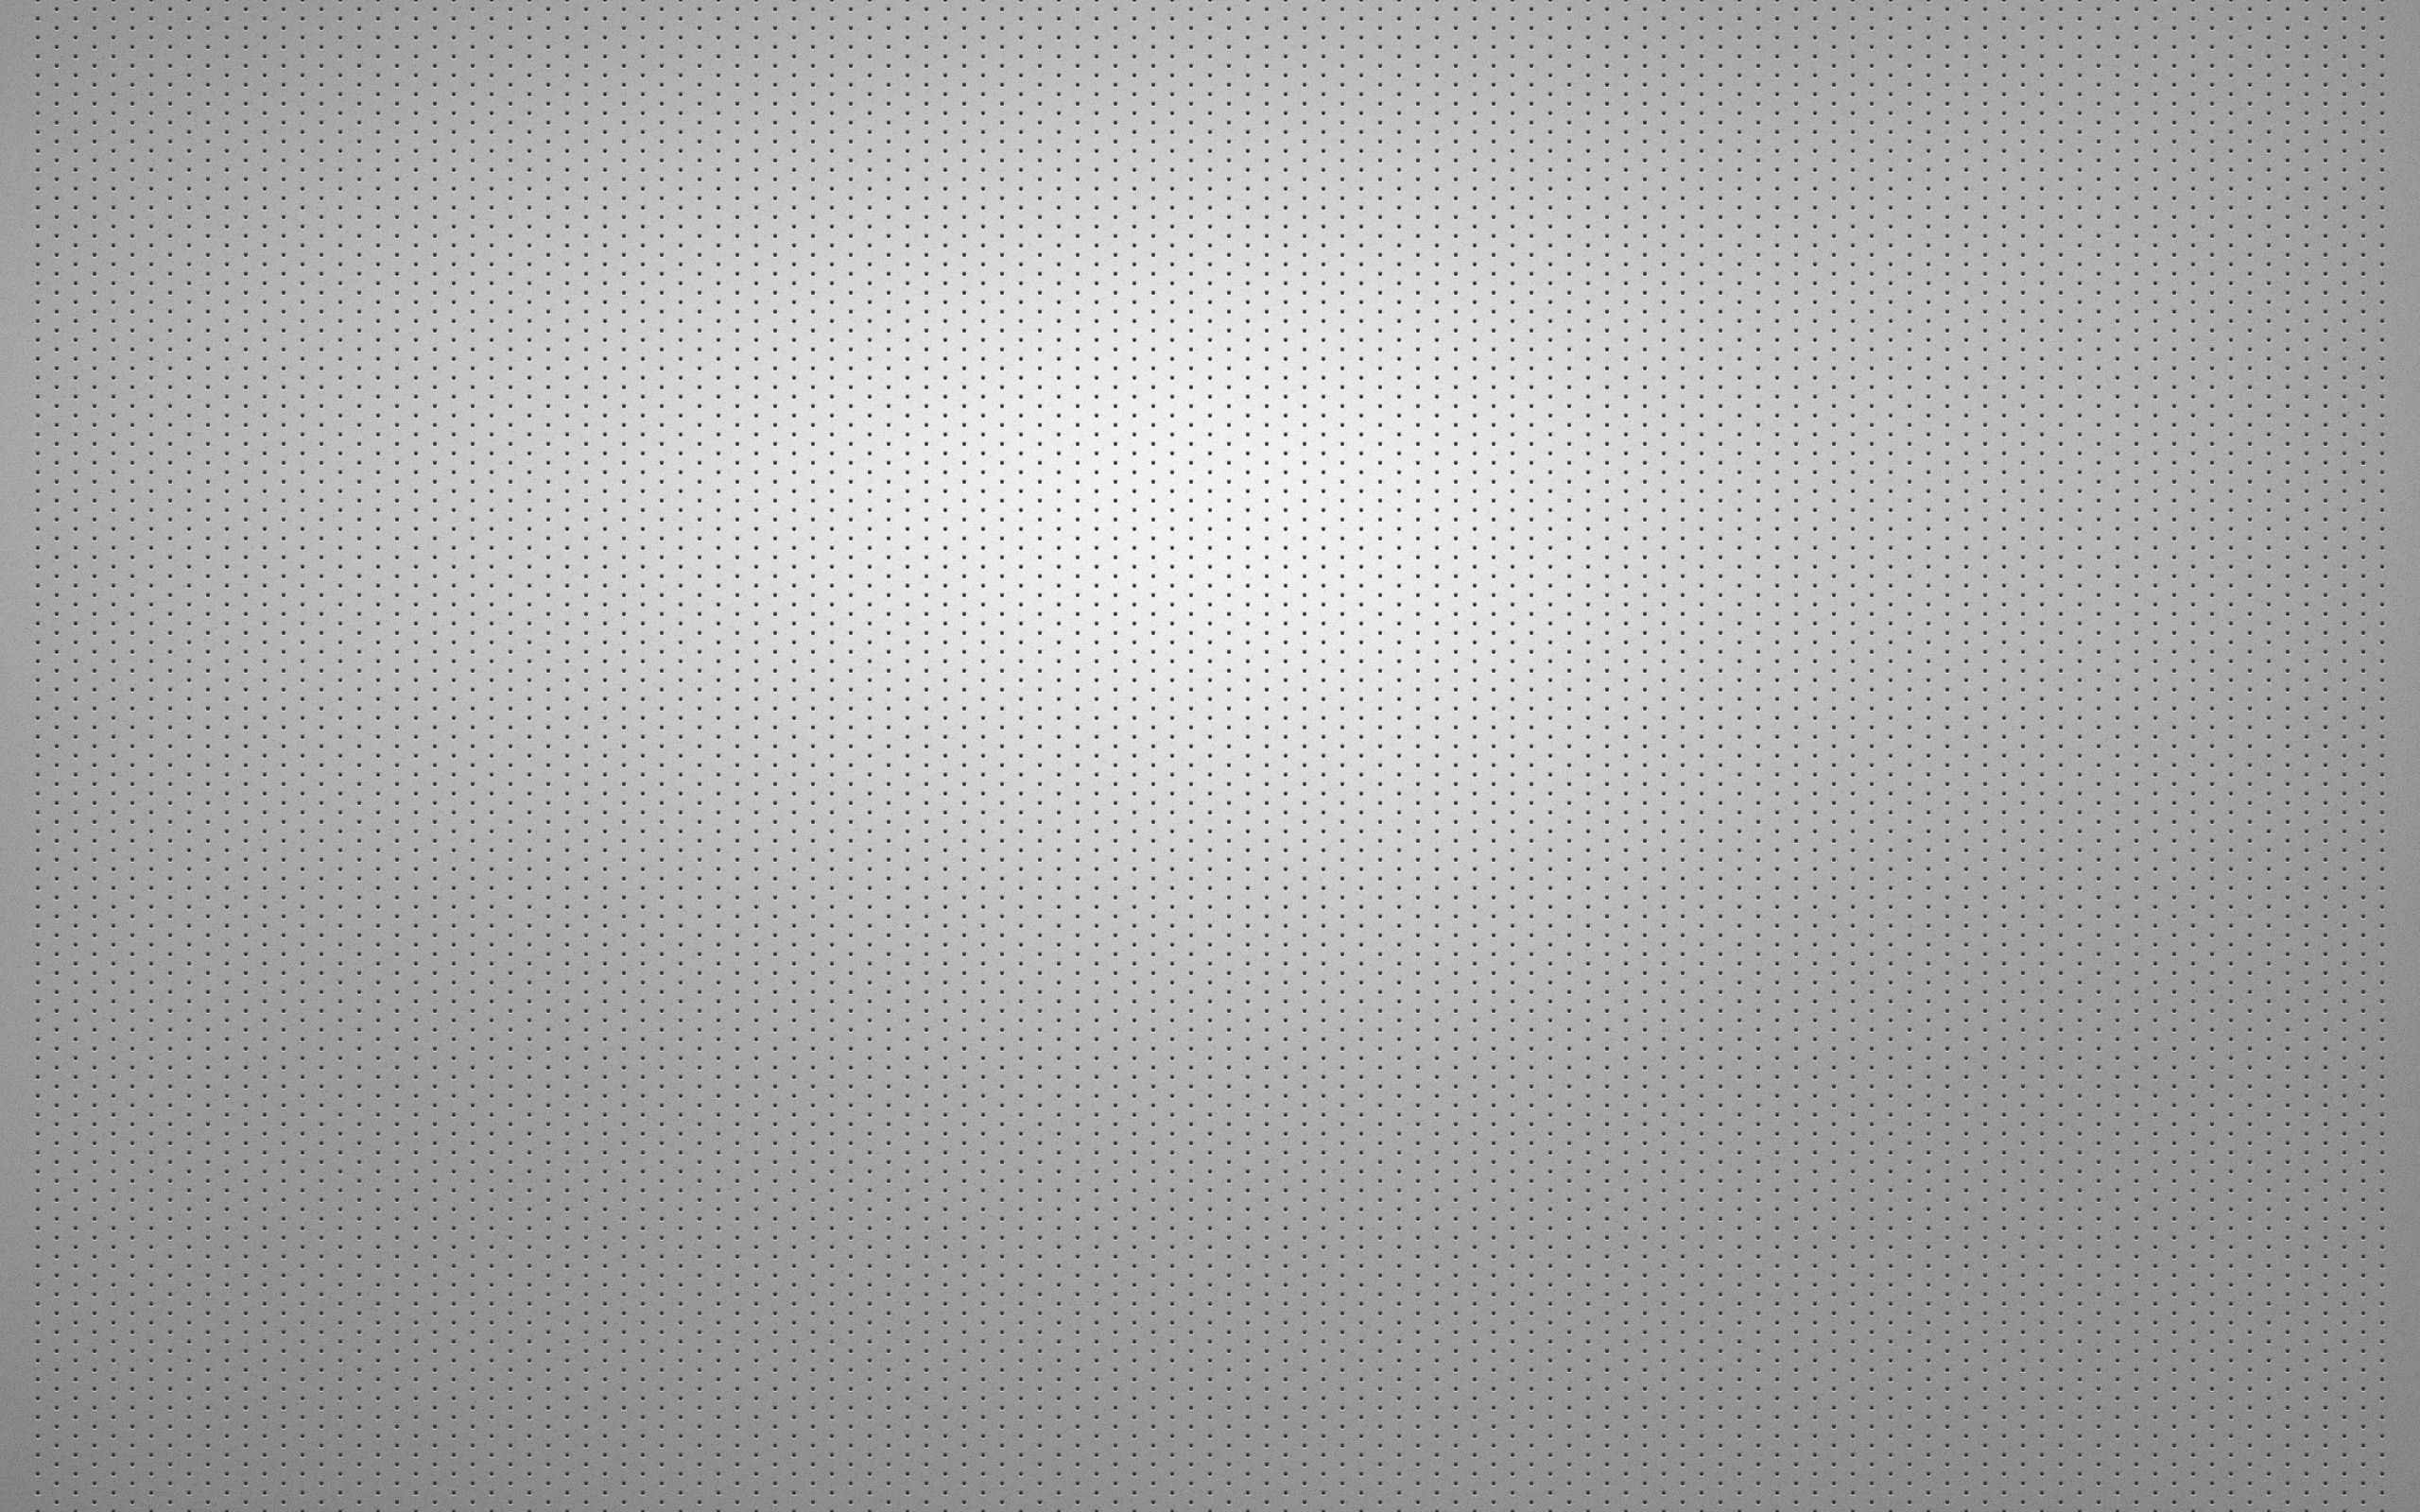 grid, silver, texture, background, points, point, textures